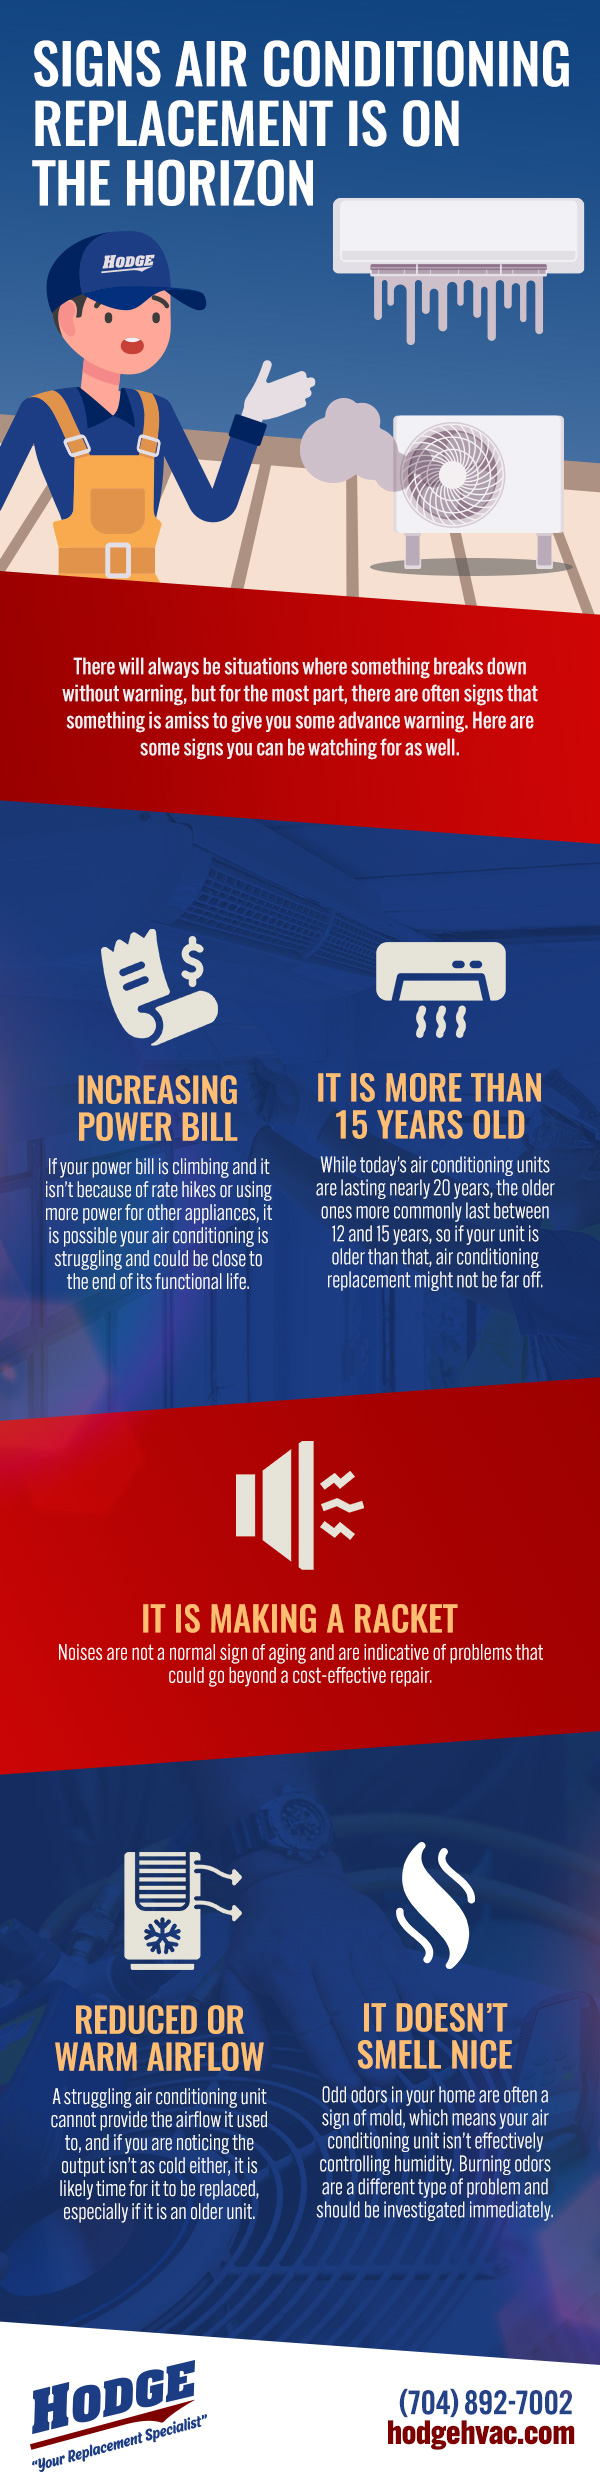 Signs Air Conditioning Replacement is On the Horizon [infographic]